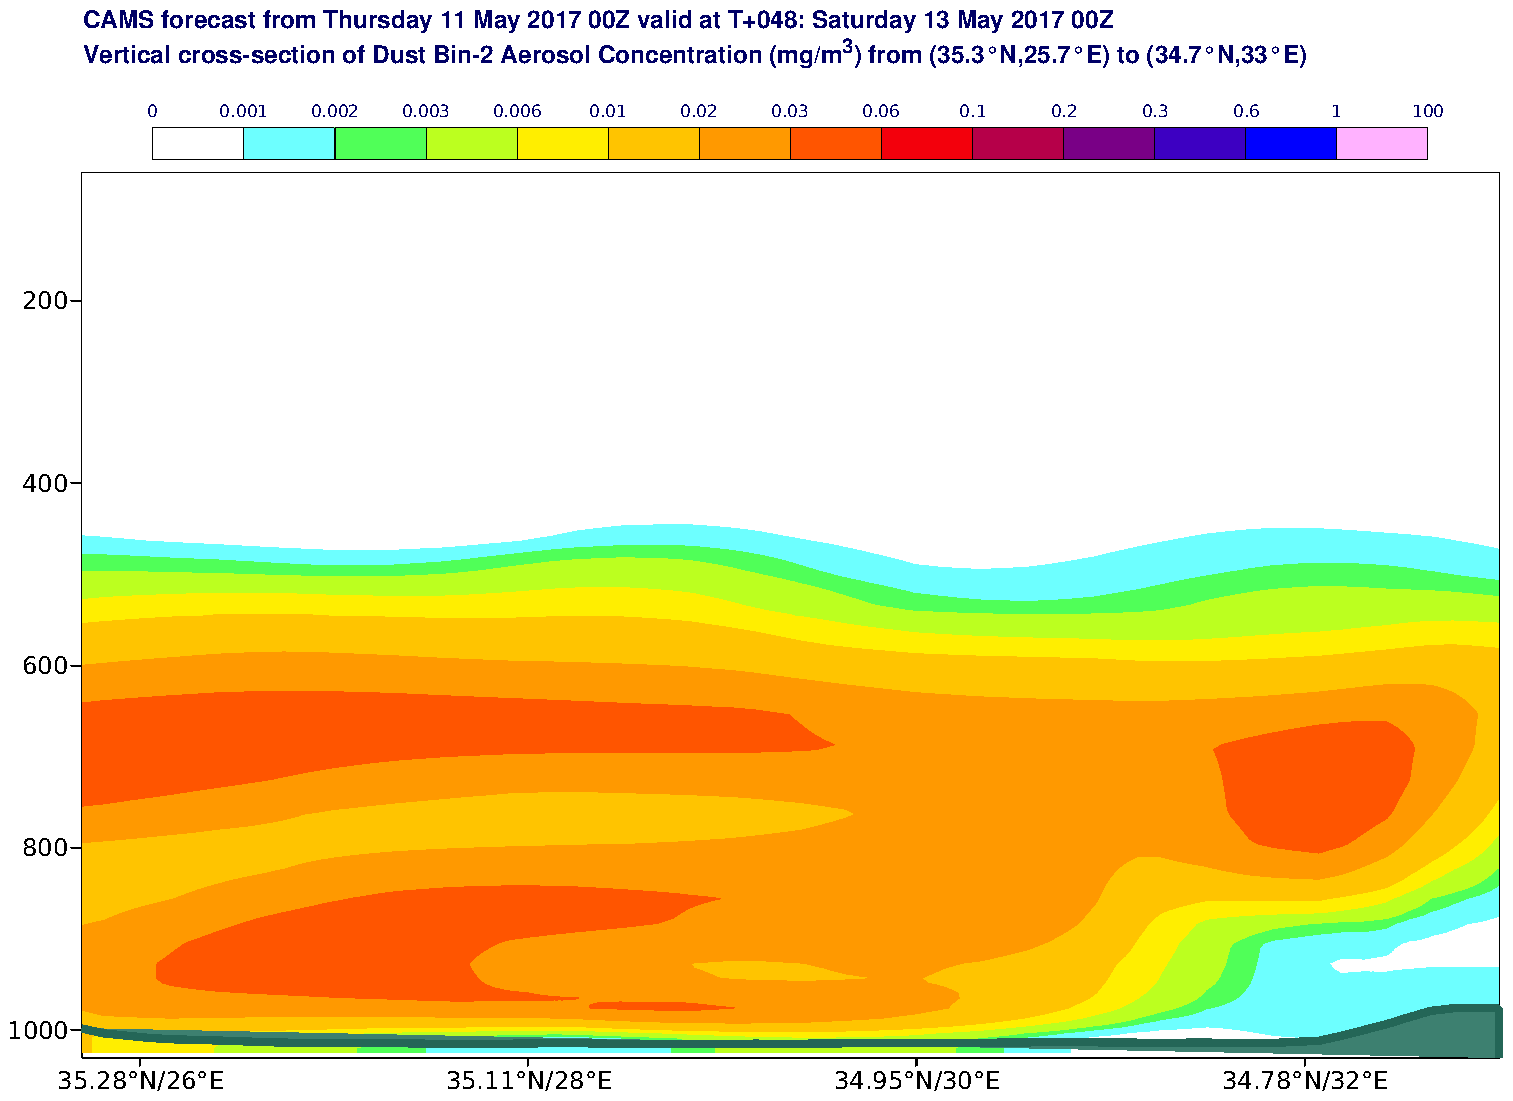 Vertical cross-section of Dust Bin-2 Aerosol Concentration (mg/m3) valid at T48 - 2017-05-13 00:00